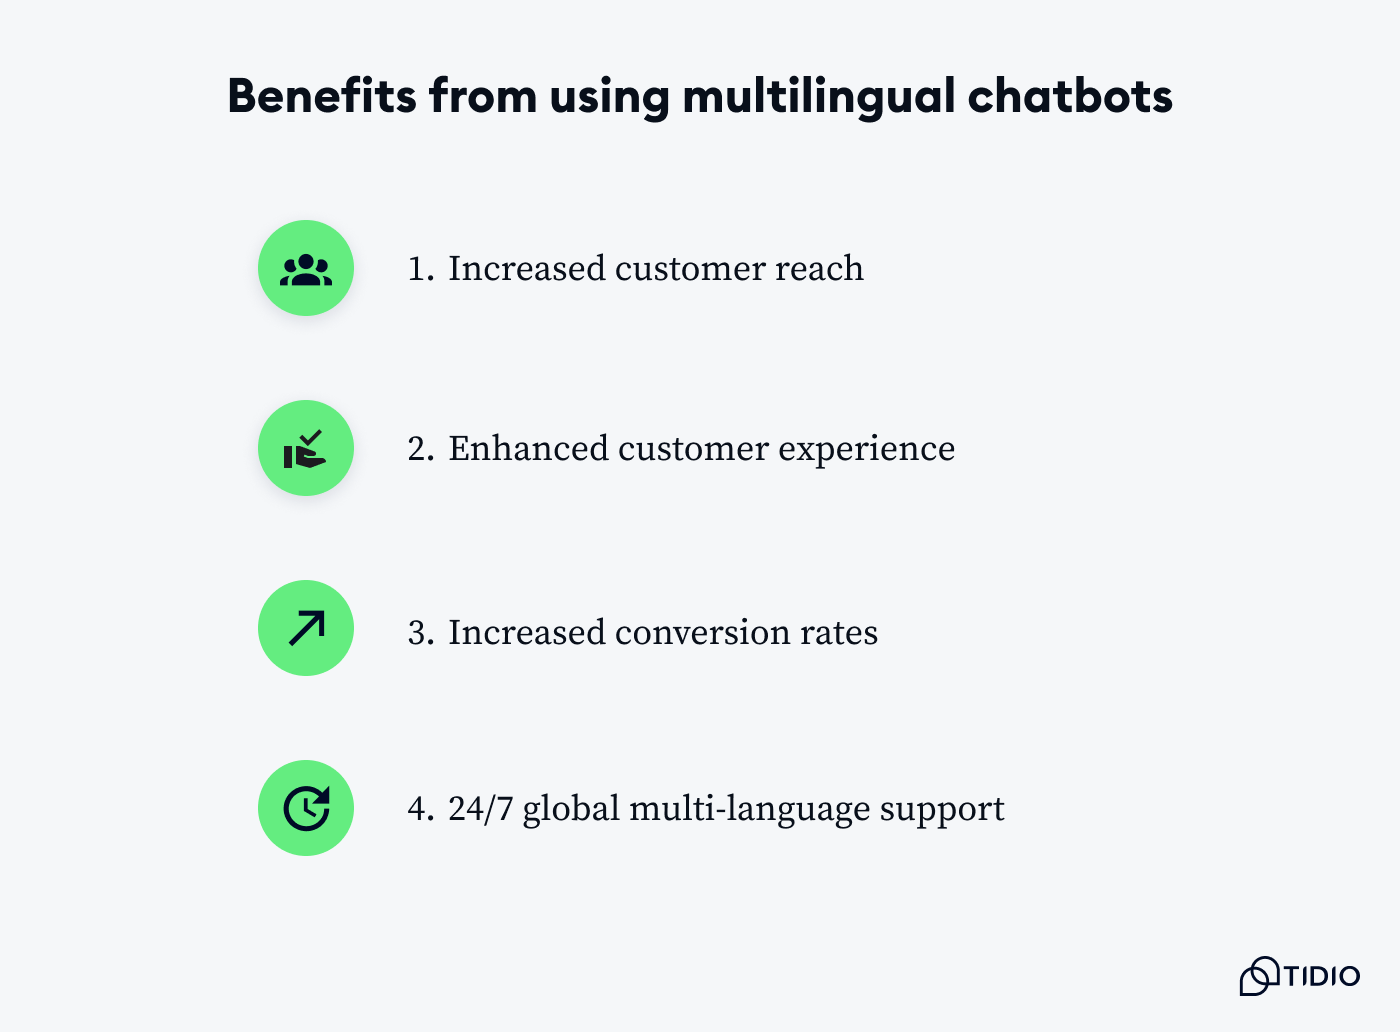 key benefits that companies can enjoy by implementing multilingual chatbots